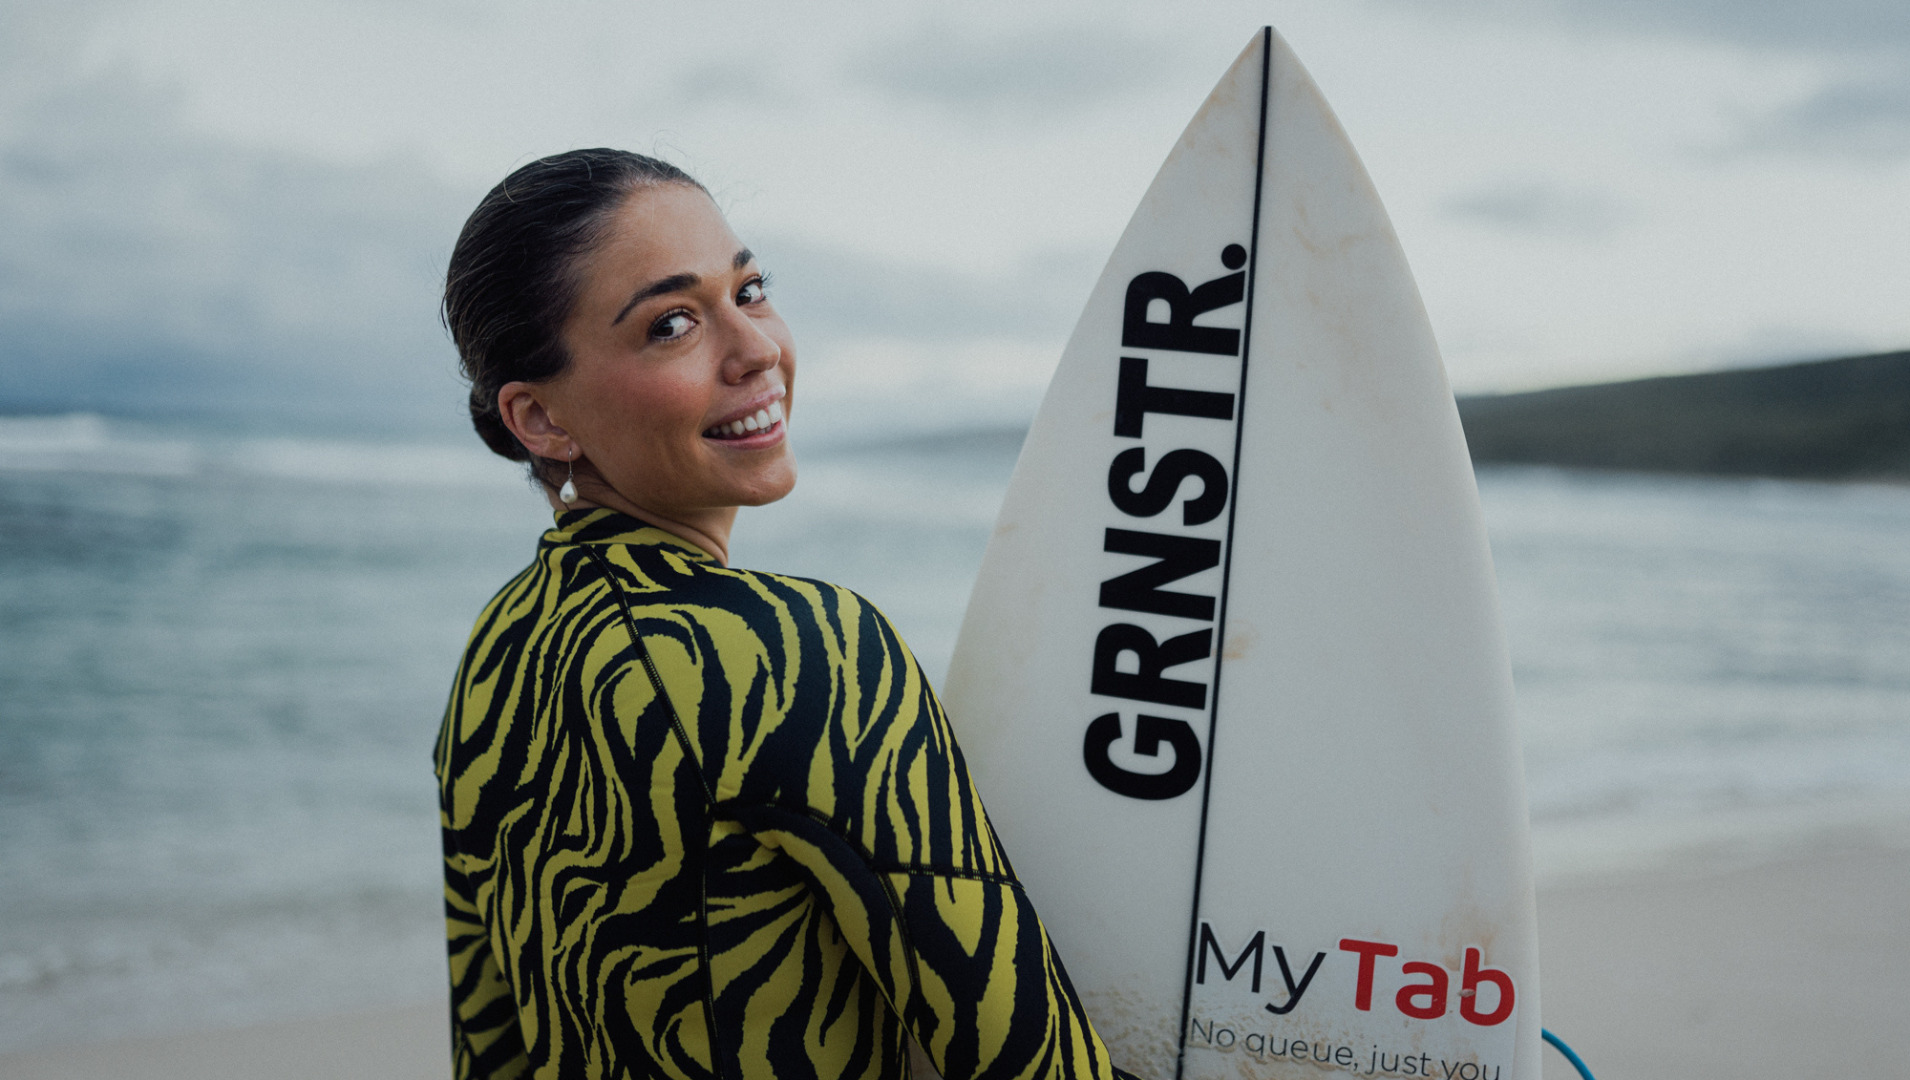 Eliza is pictured wearing a brightly patterned yellow and black wetsuit in front of the ocean